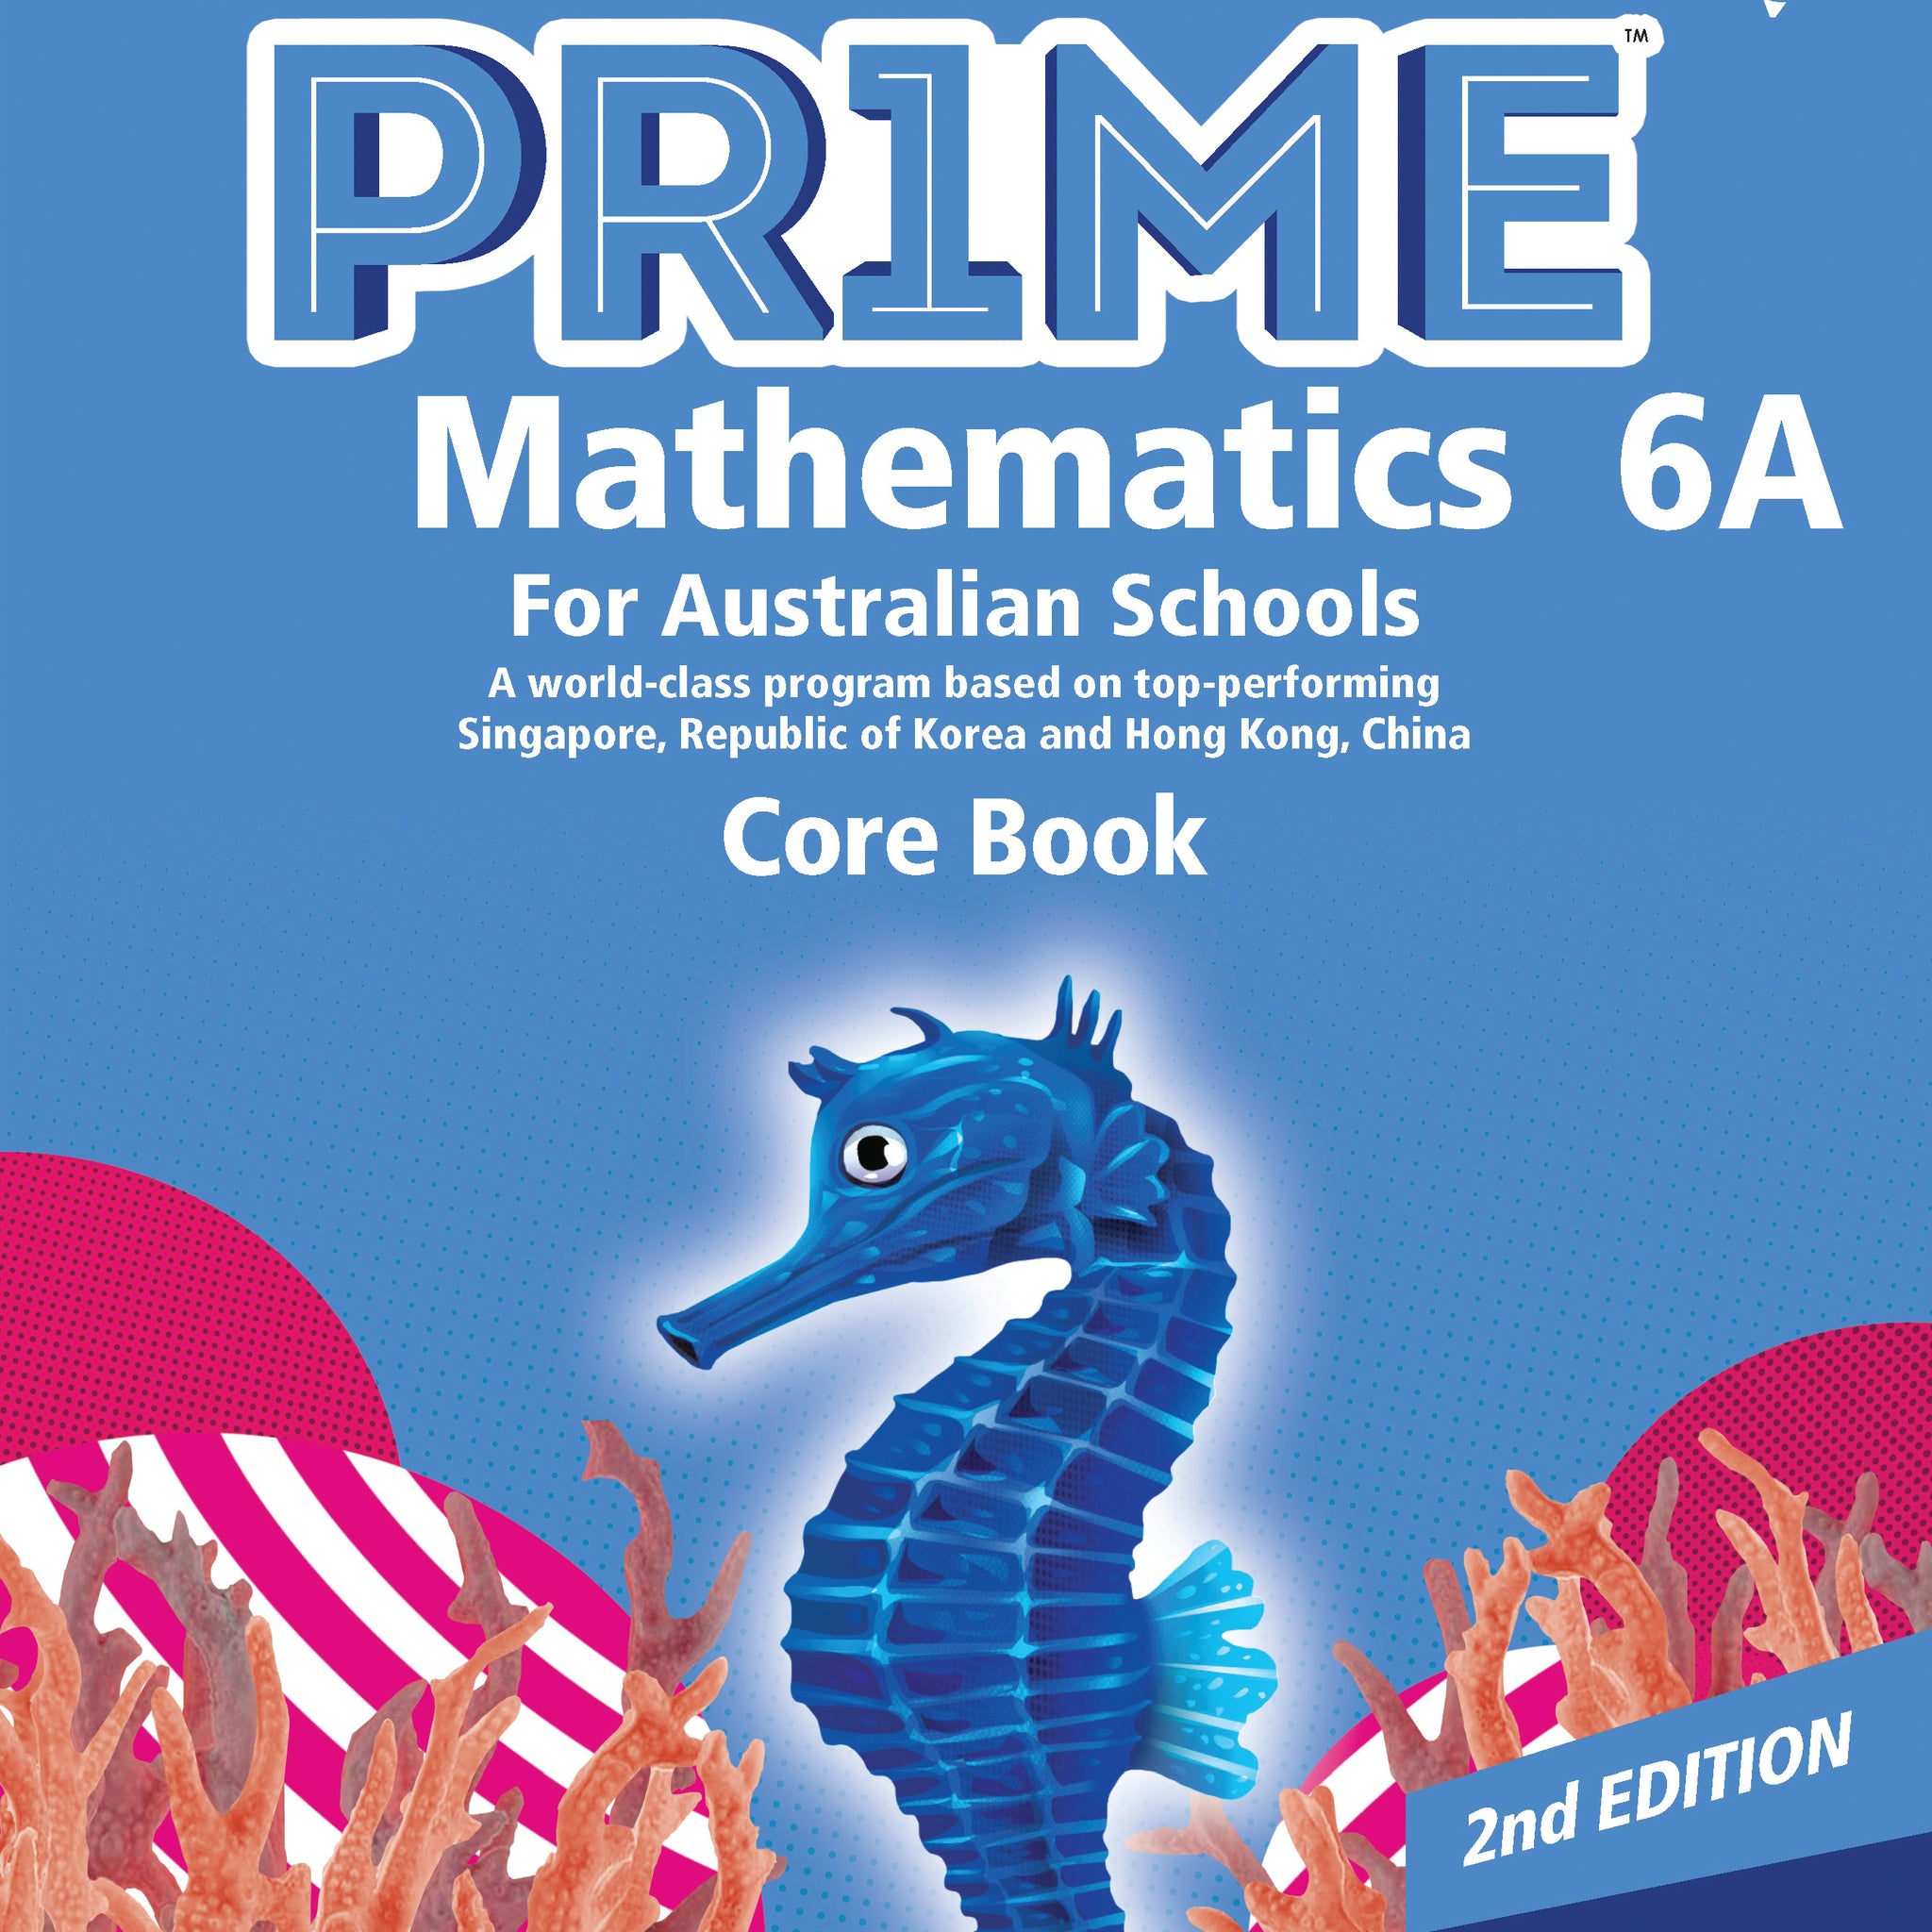 PRIME AUS Student Book 6A (2nd Edition)